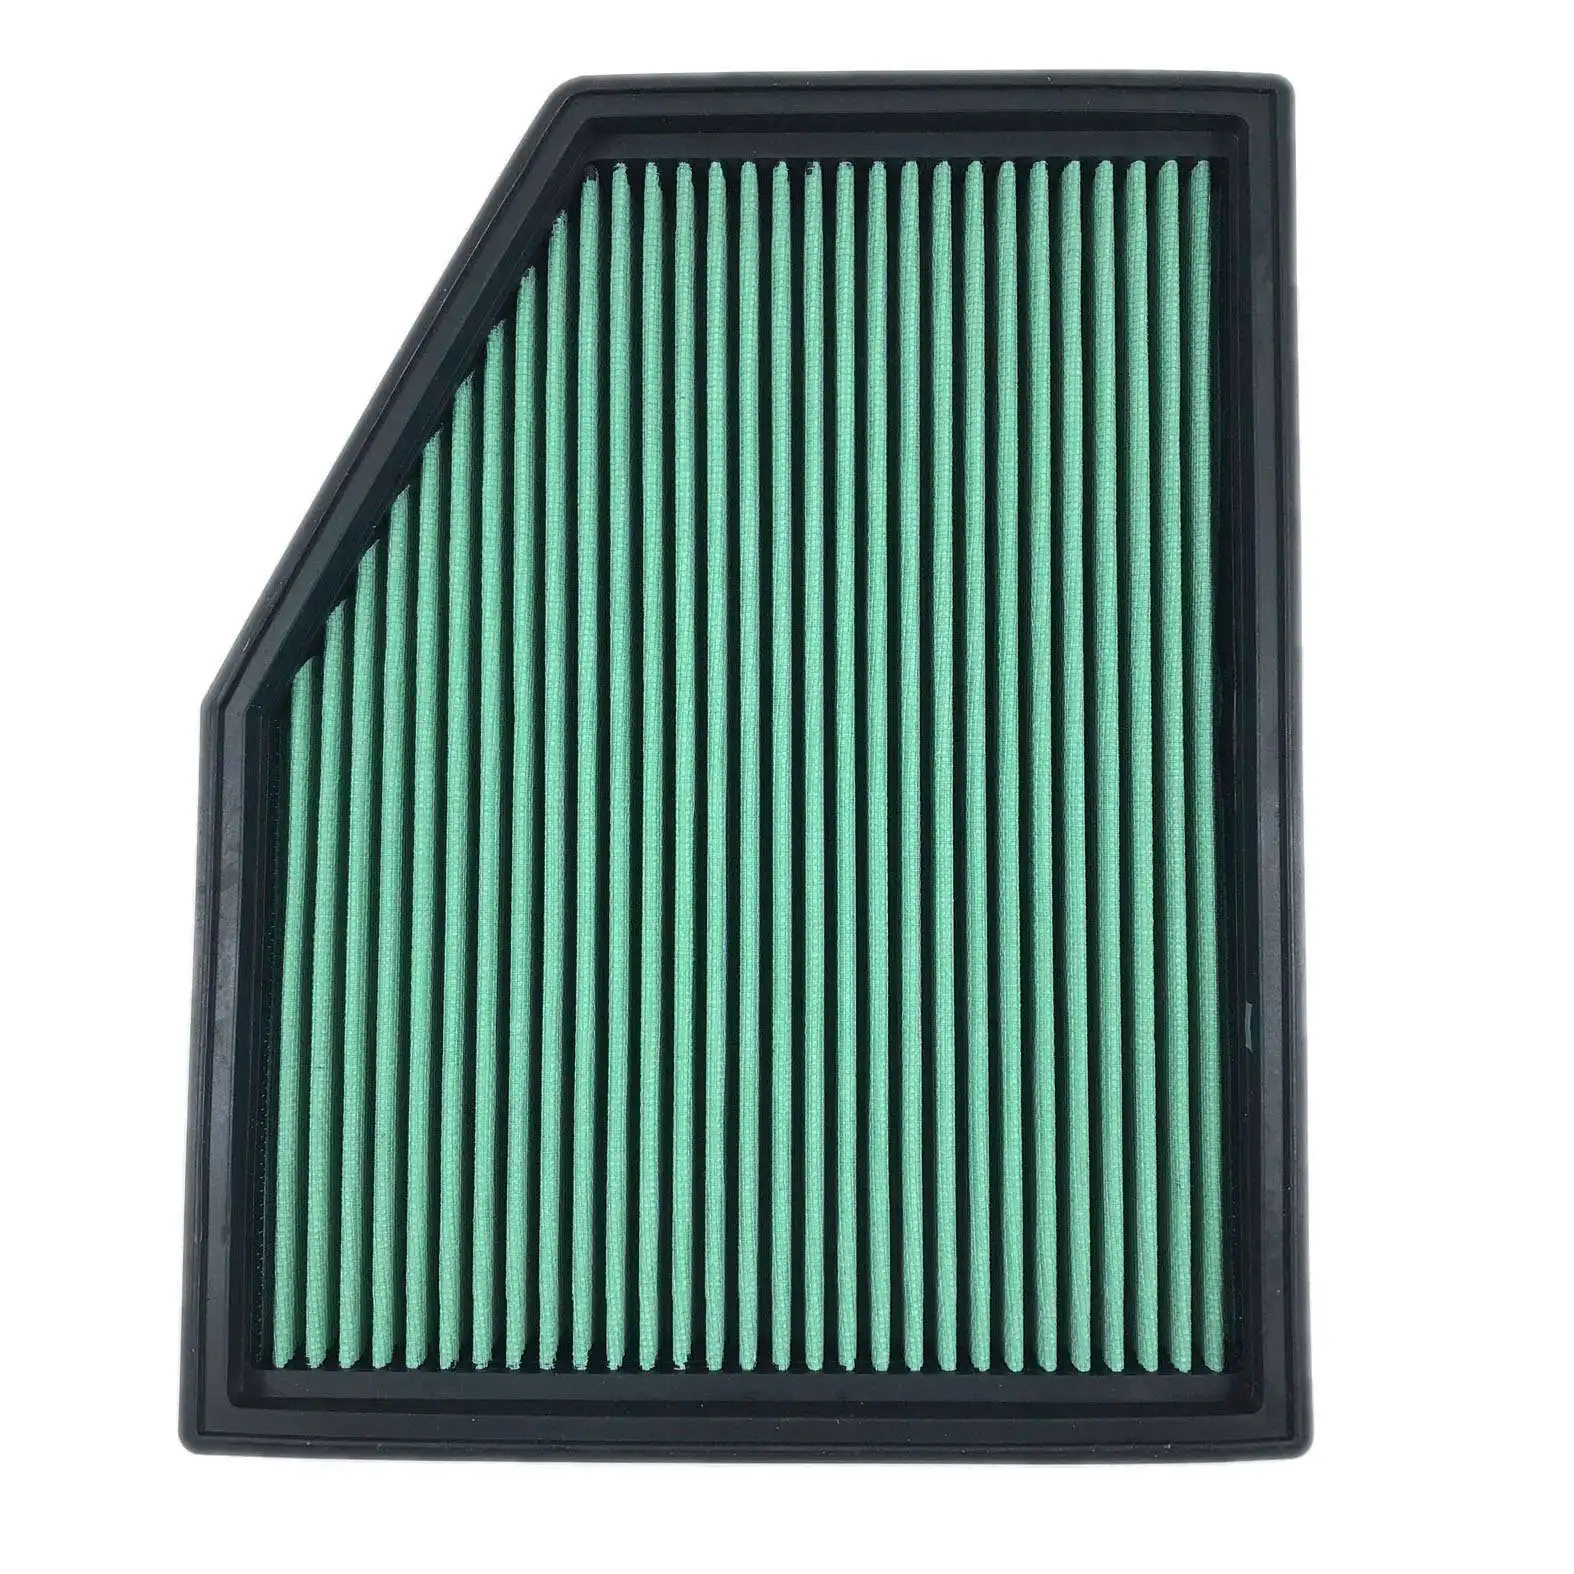 

Car Air Filter Air Intake Washable Replacement High Flow Filter for-BMW E60 E61 520I 523I 525I 525Xi 528I 530I 630I Z4